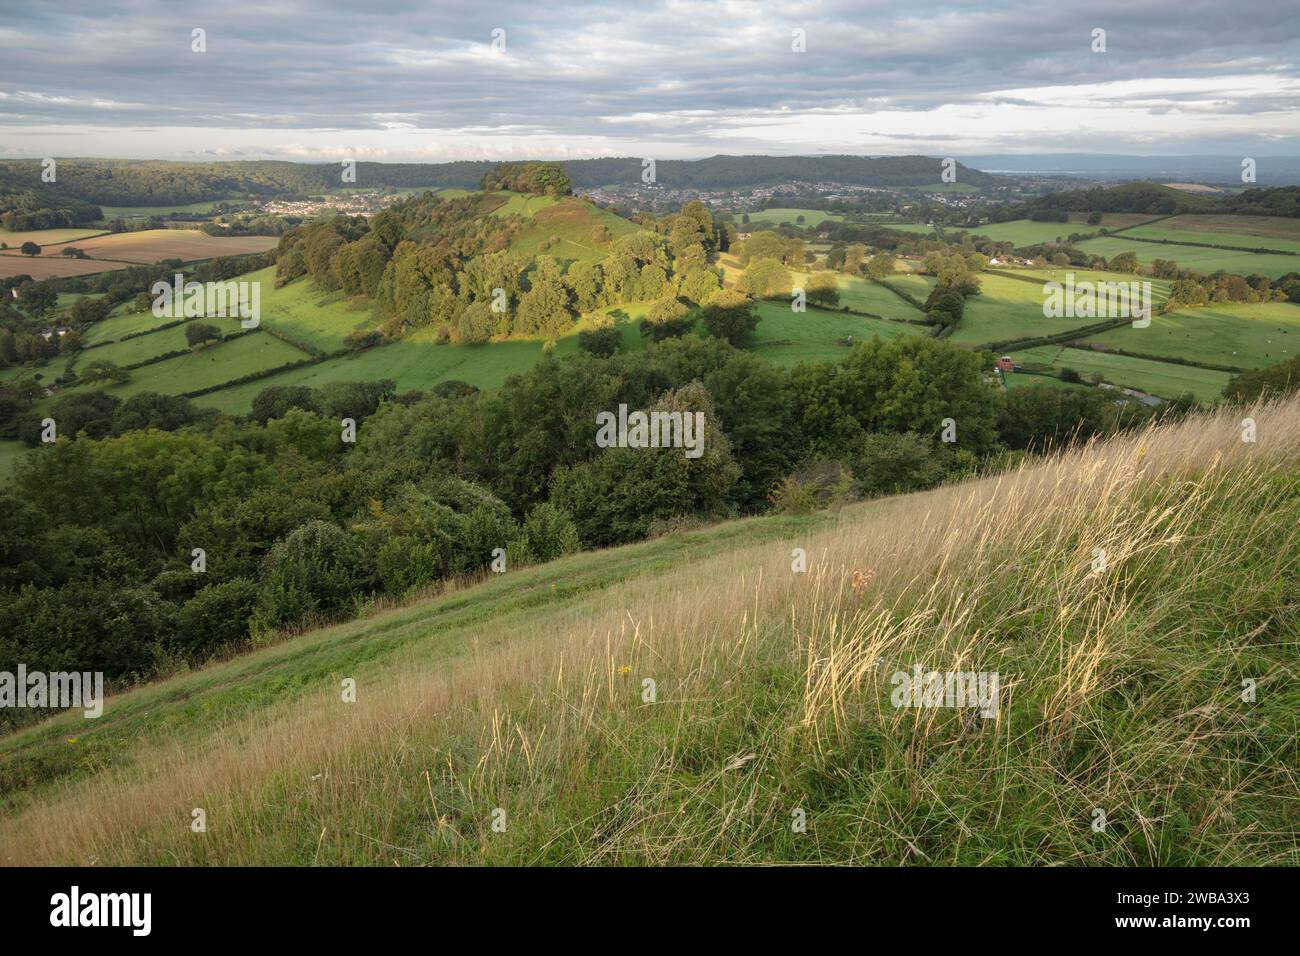 View to Dursley from Uley Bury Hillfort, Dursley, Cotswolds, Gloucestershire, England, United Kingdom, Europe Stock Photo